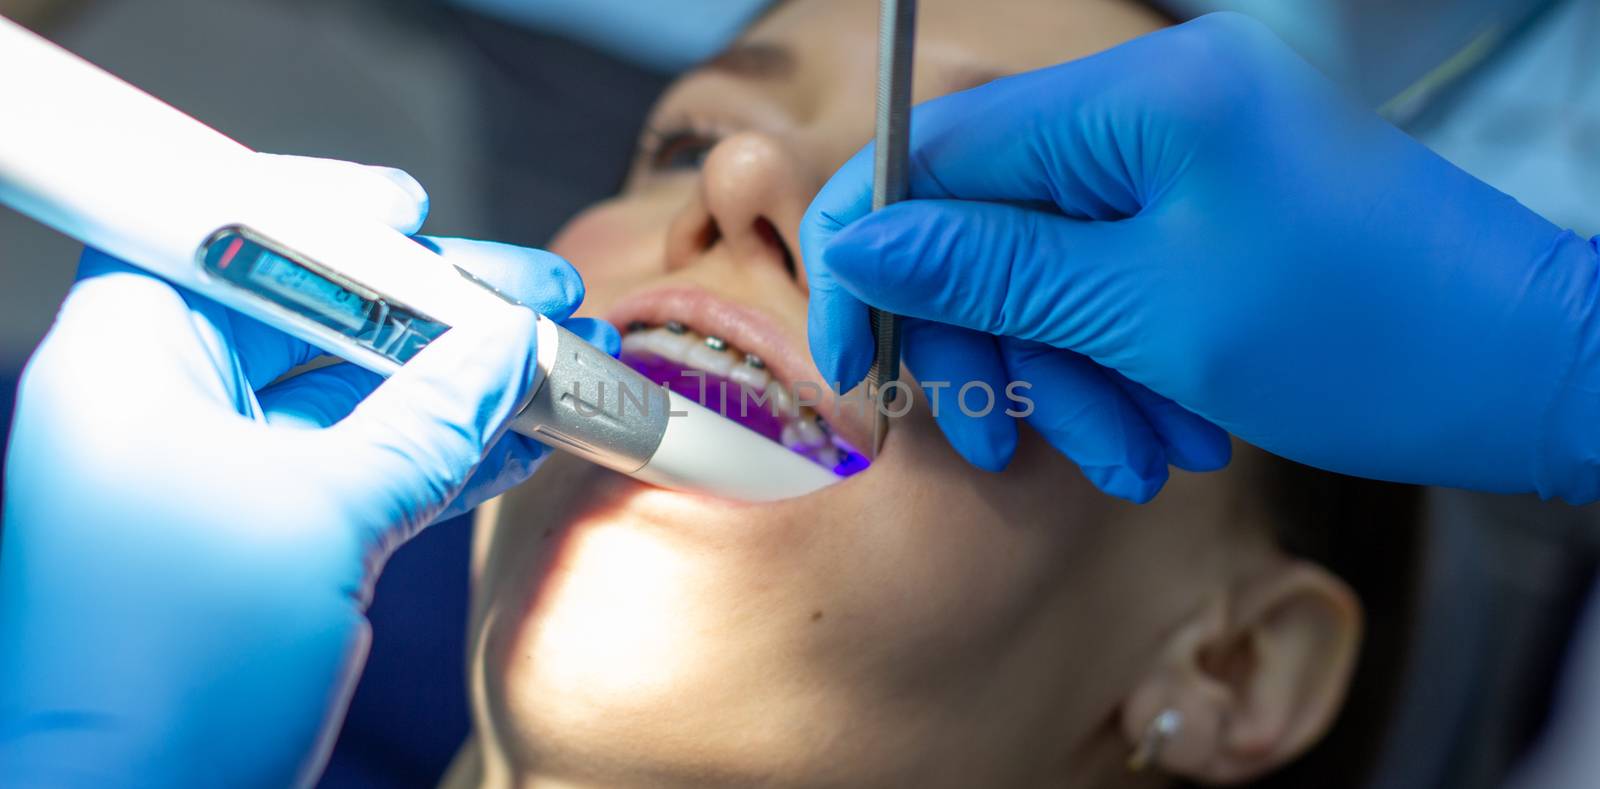 A woman with dental braces visits an orthodontist at the clinic. in the dental chair during the procedure of installing braces on the upper and lower teeth. Dentist and assistant work together, they have dental instruments in their hands. concept of dentistry